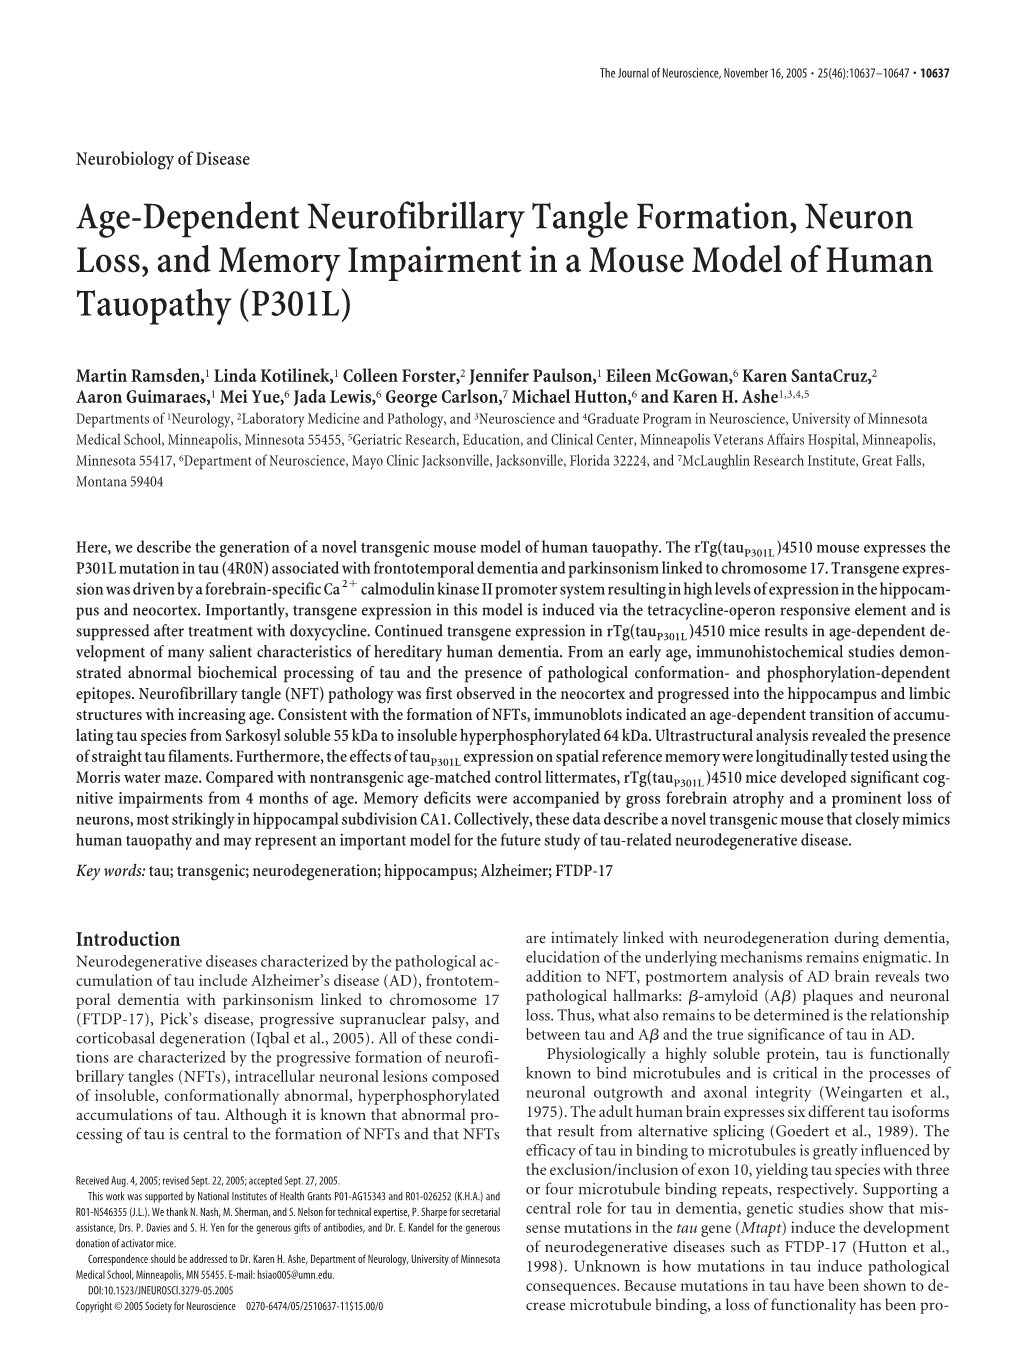 Age-Dependent Neurofibrillary Tangle Formation, Neuron Loss, and Memory Impairment in a Mouse Model of Human Tauopathy (P301L)